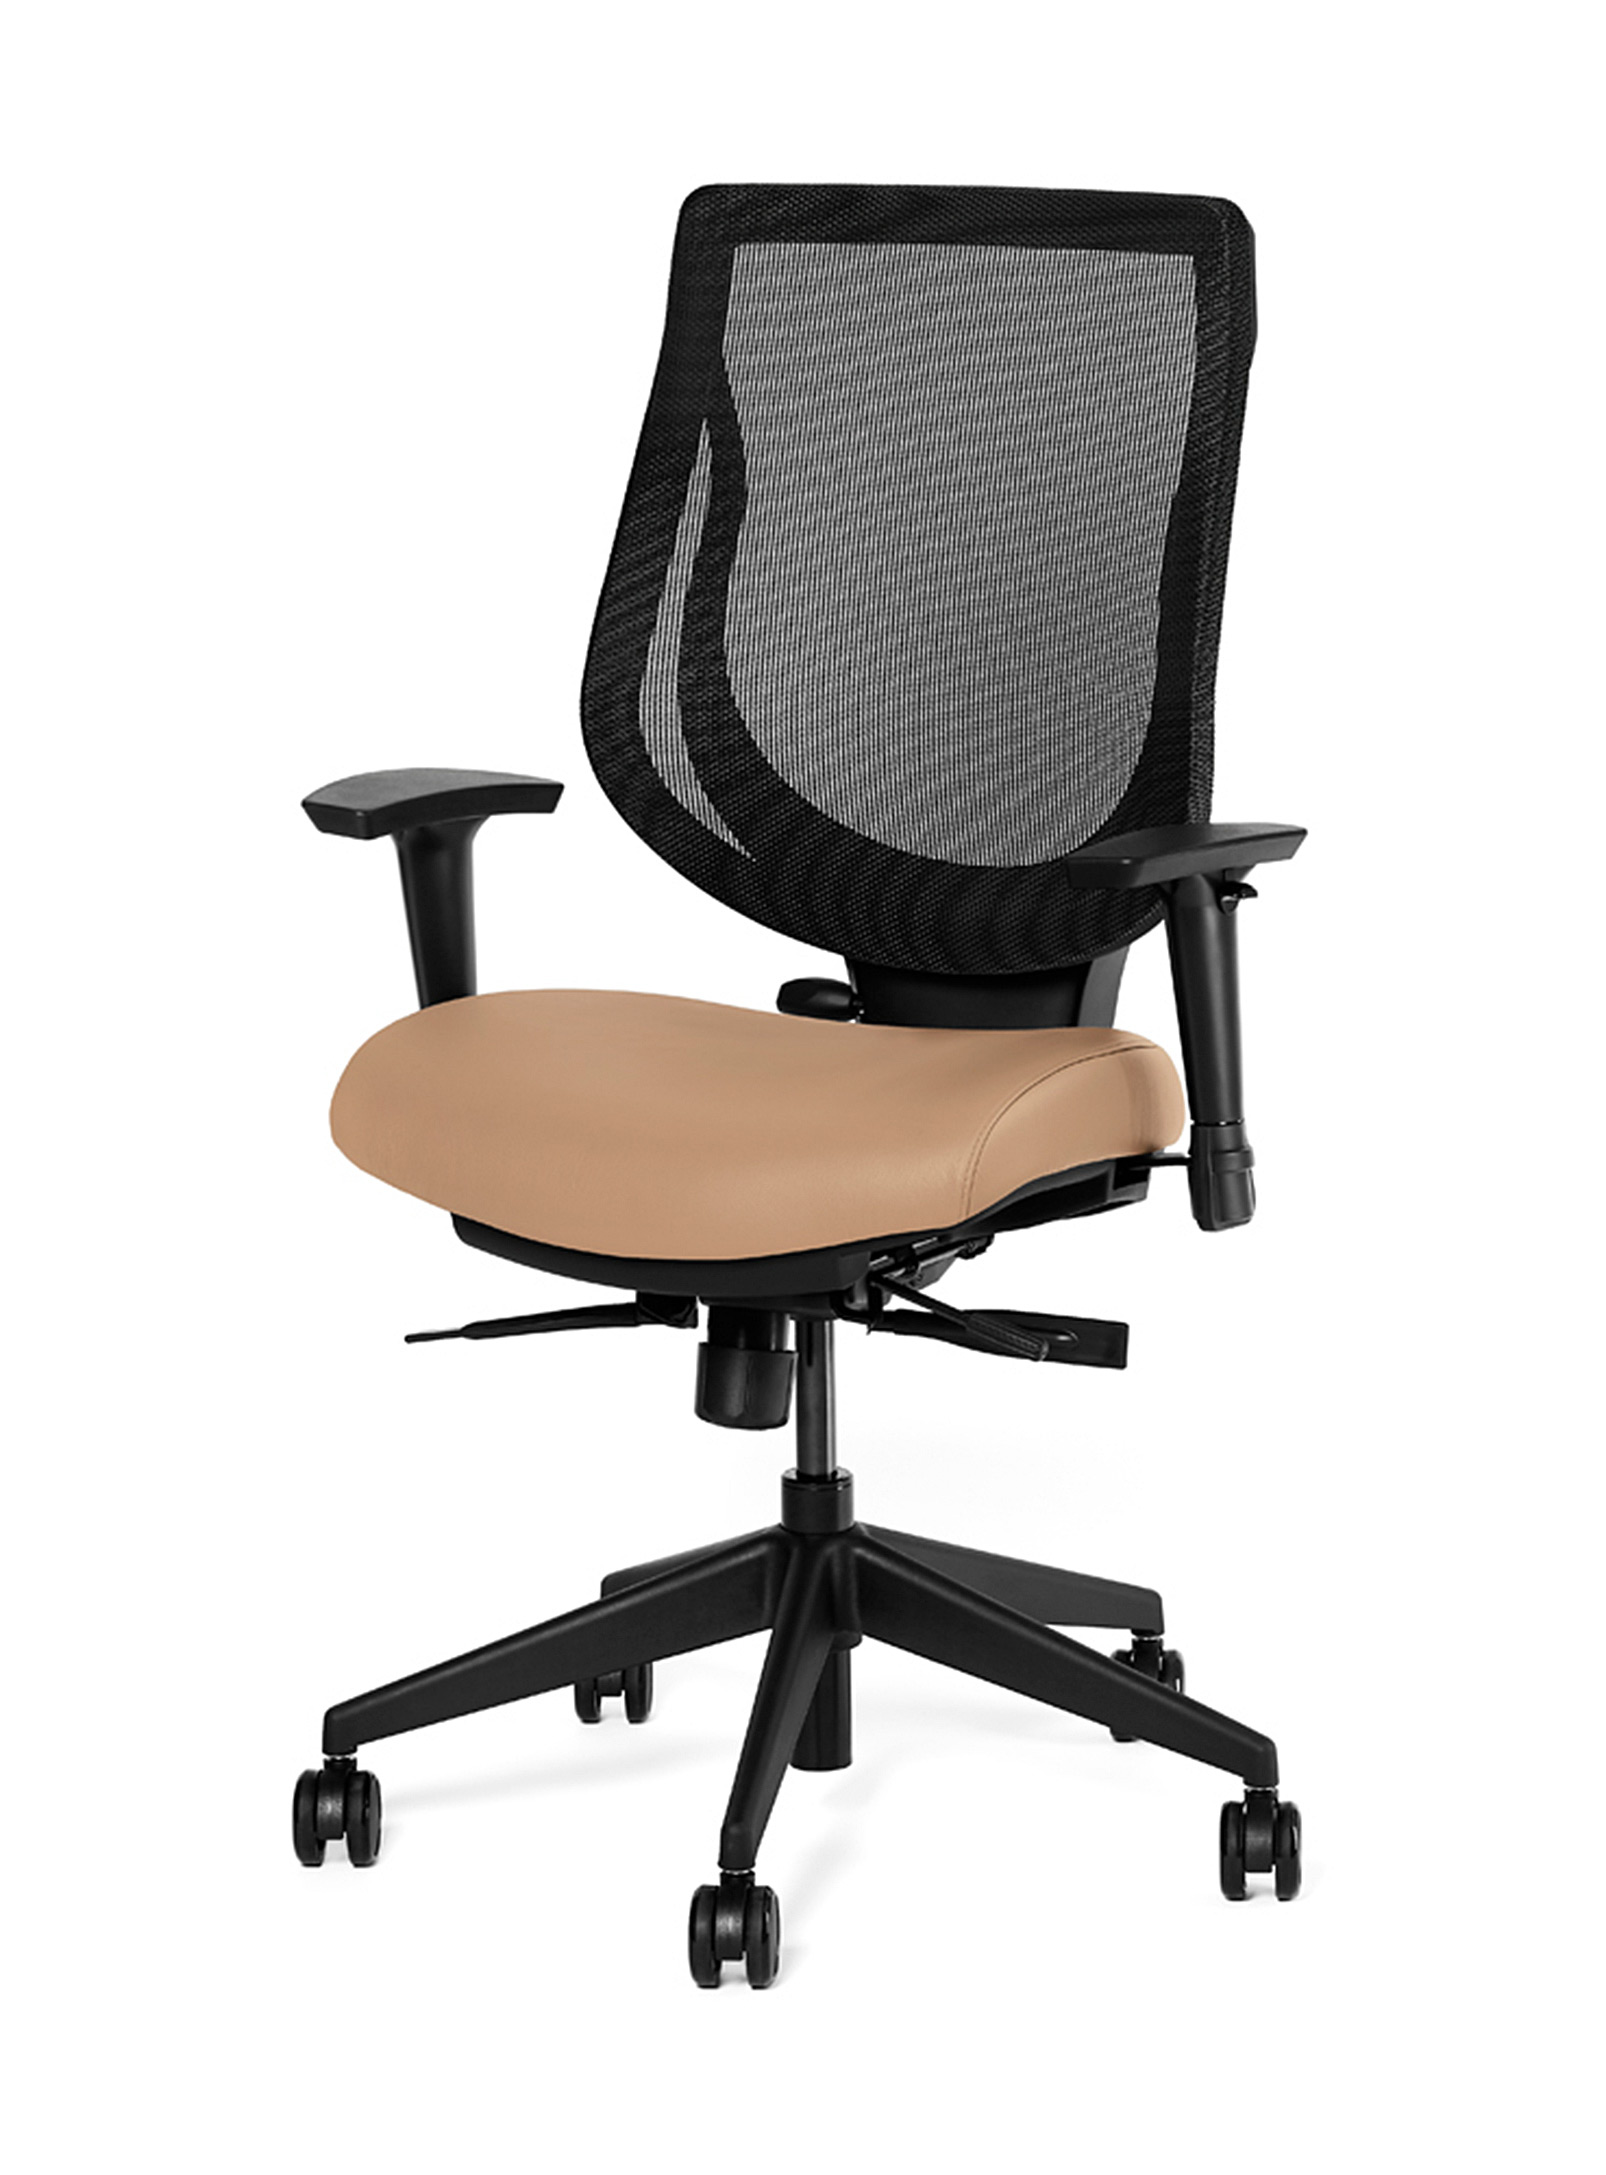 Ergonofis Youtoo Ergonomic Chair With Leather Seat Black Base In Honey